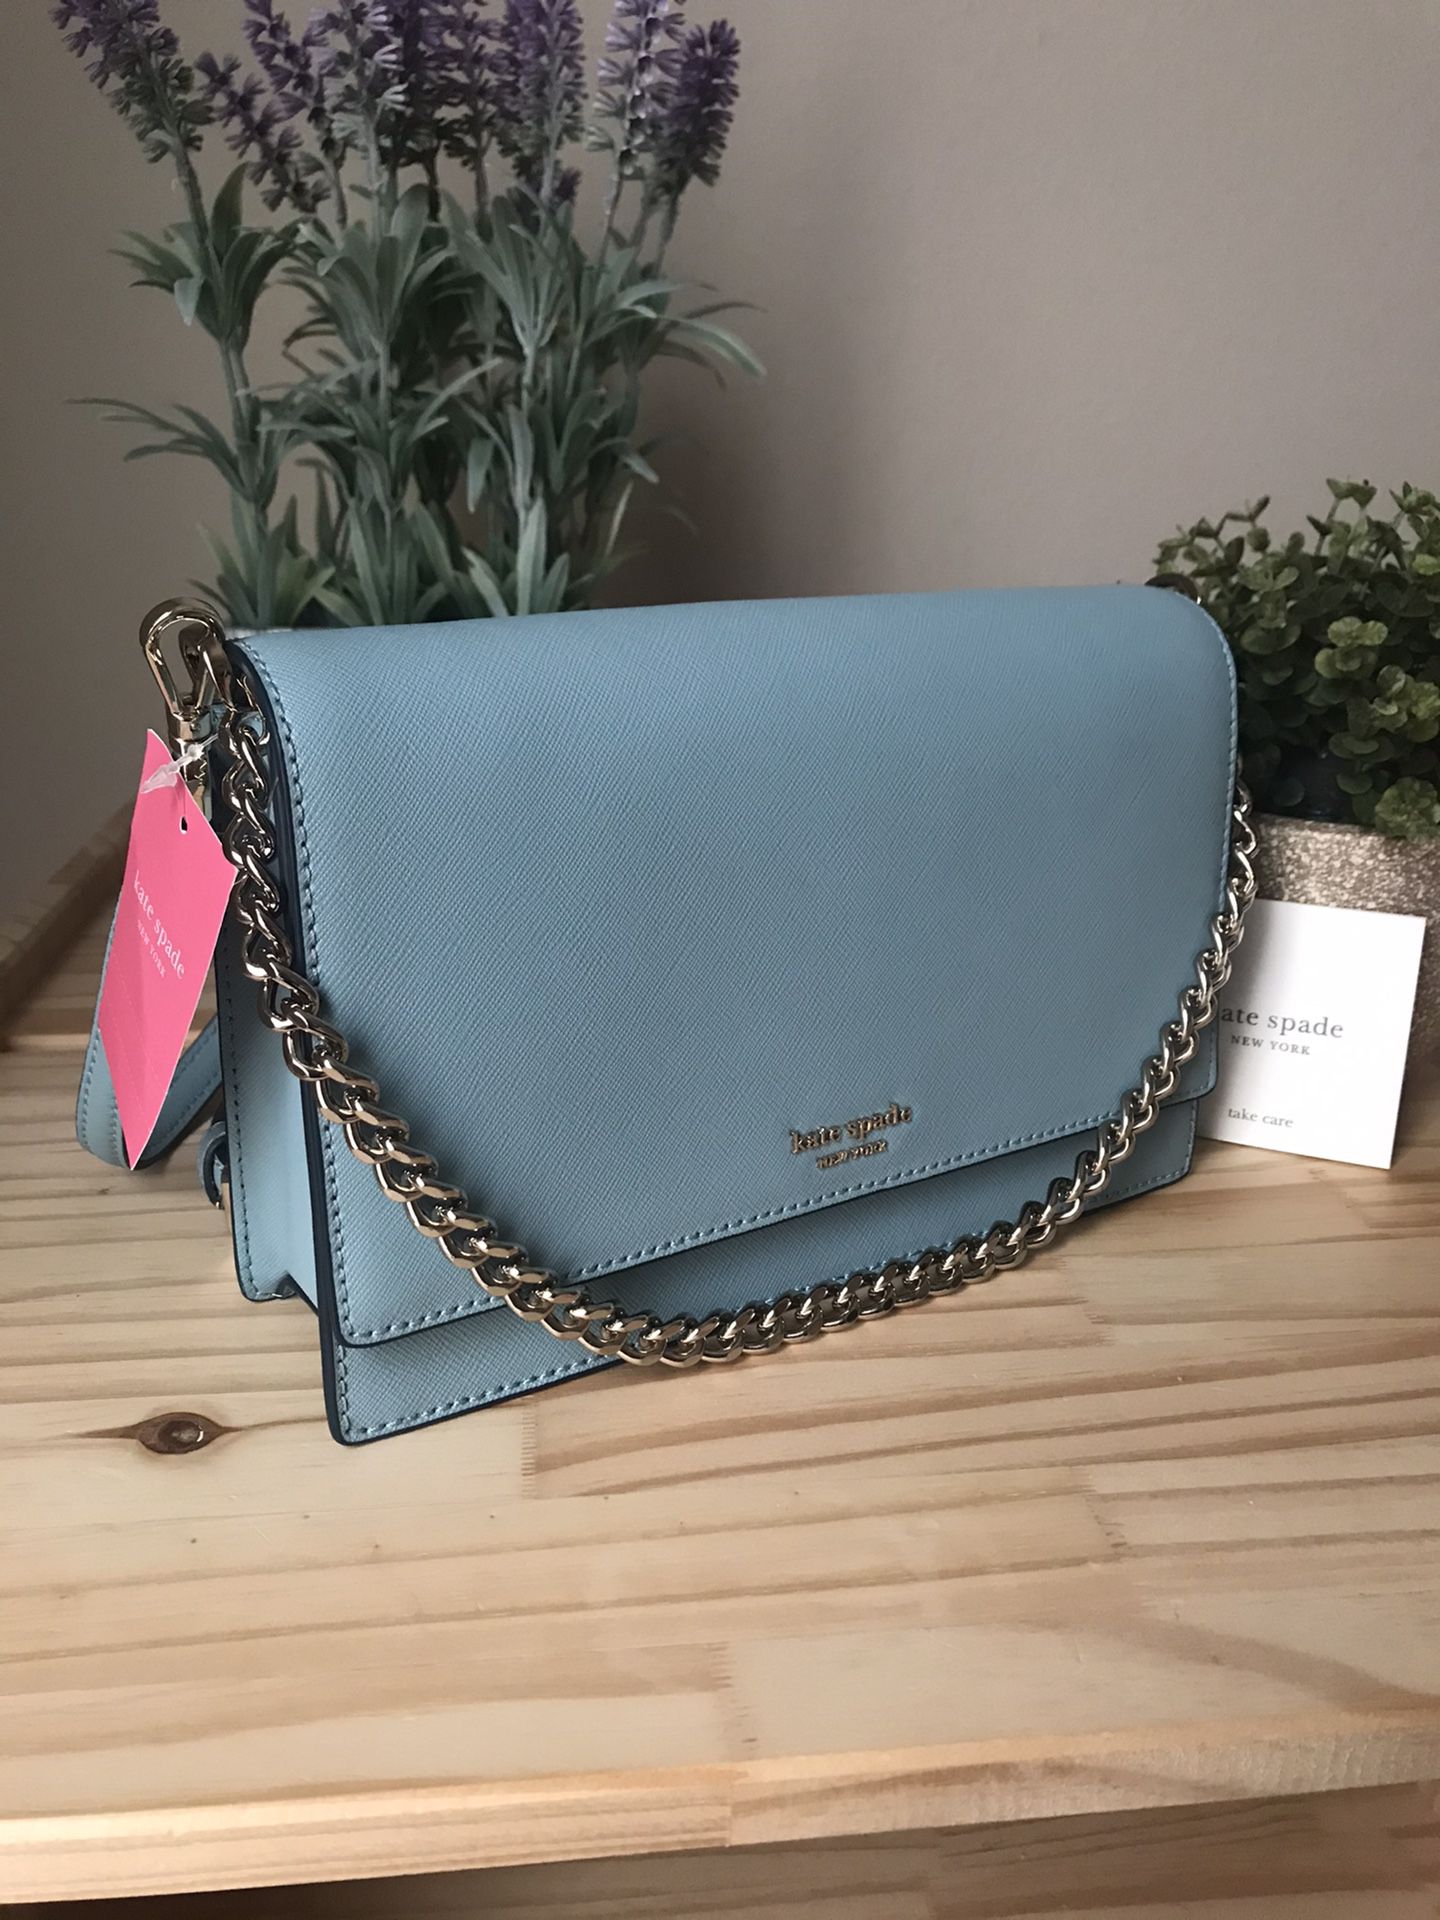 New With Tags Kate Spade Purse